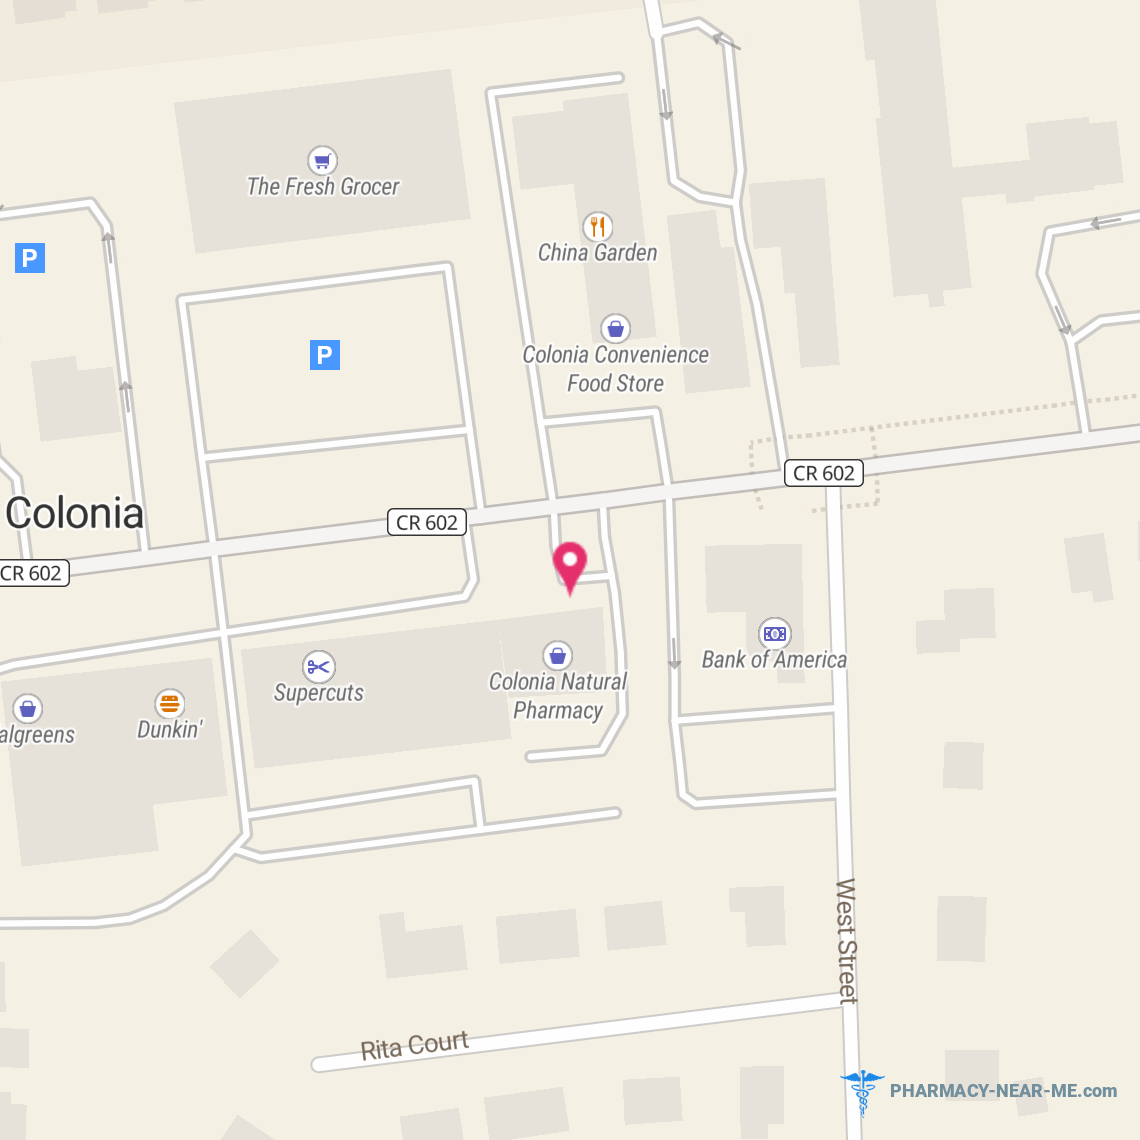 COLONIA CARE PHARMACY - Pharmacy Hours, Phone, Reviews & Information: 515 Inman Avenue, Colonia, New Jersey 07067, United States